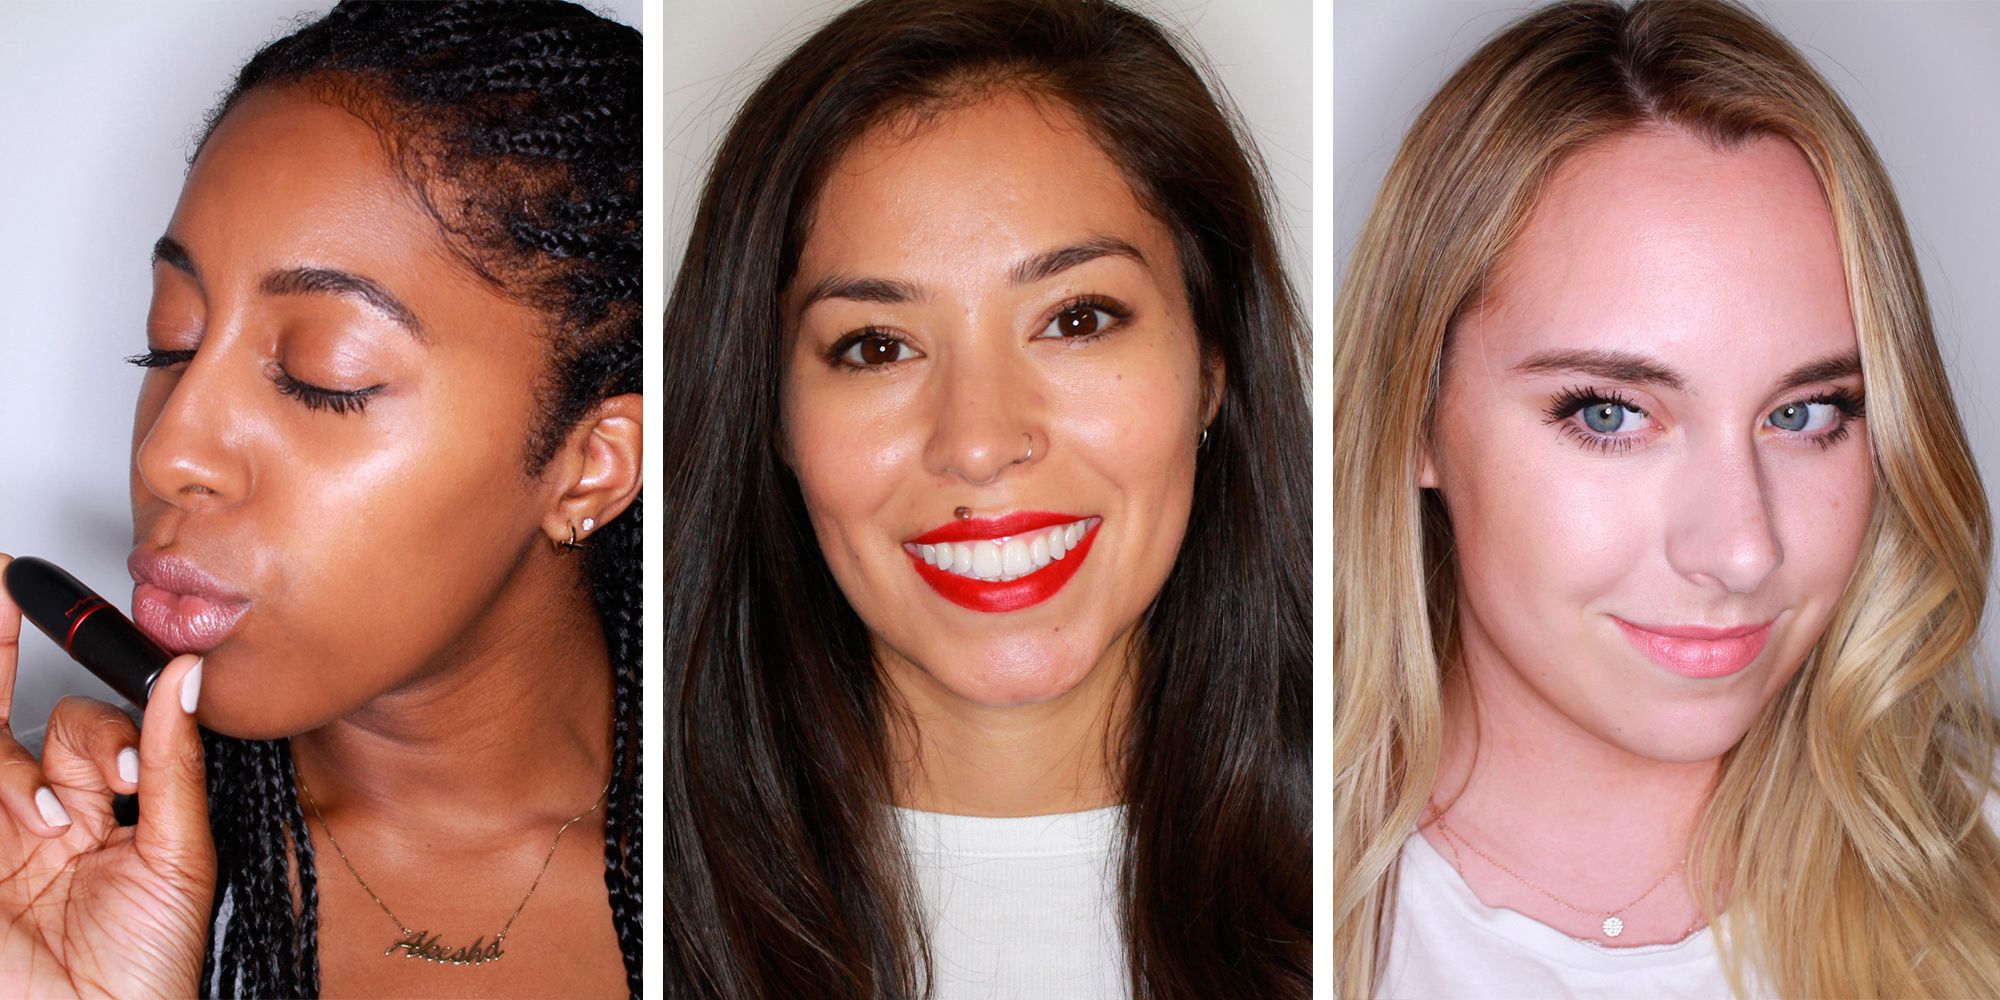 boksning begynde Overskyet MAC lipstick: 6 women get matched to their most flattering shade